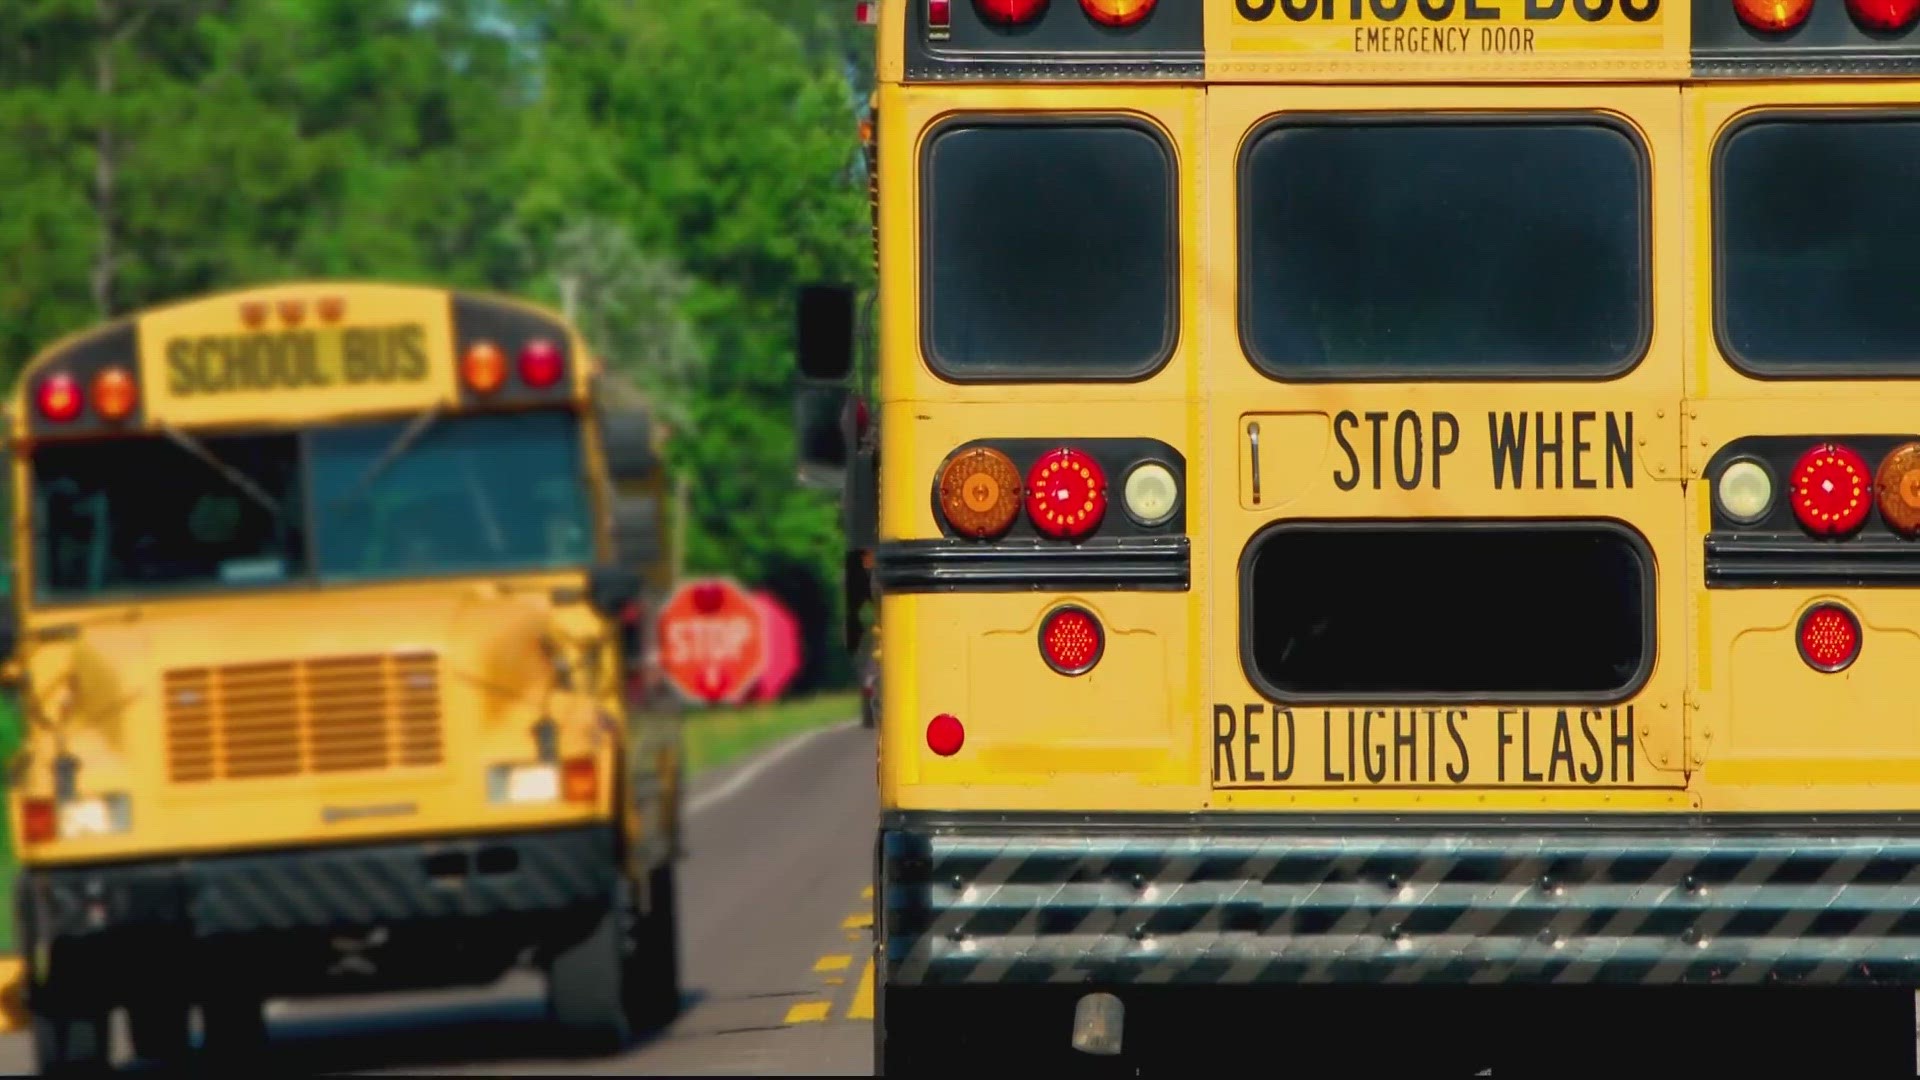 How well do you know the rules of the road when it comes to school buses? Here's a little reminder.